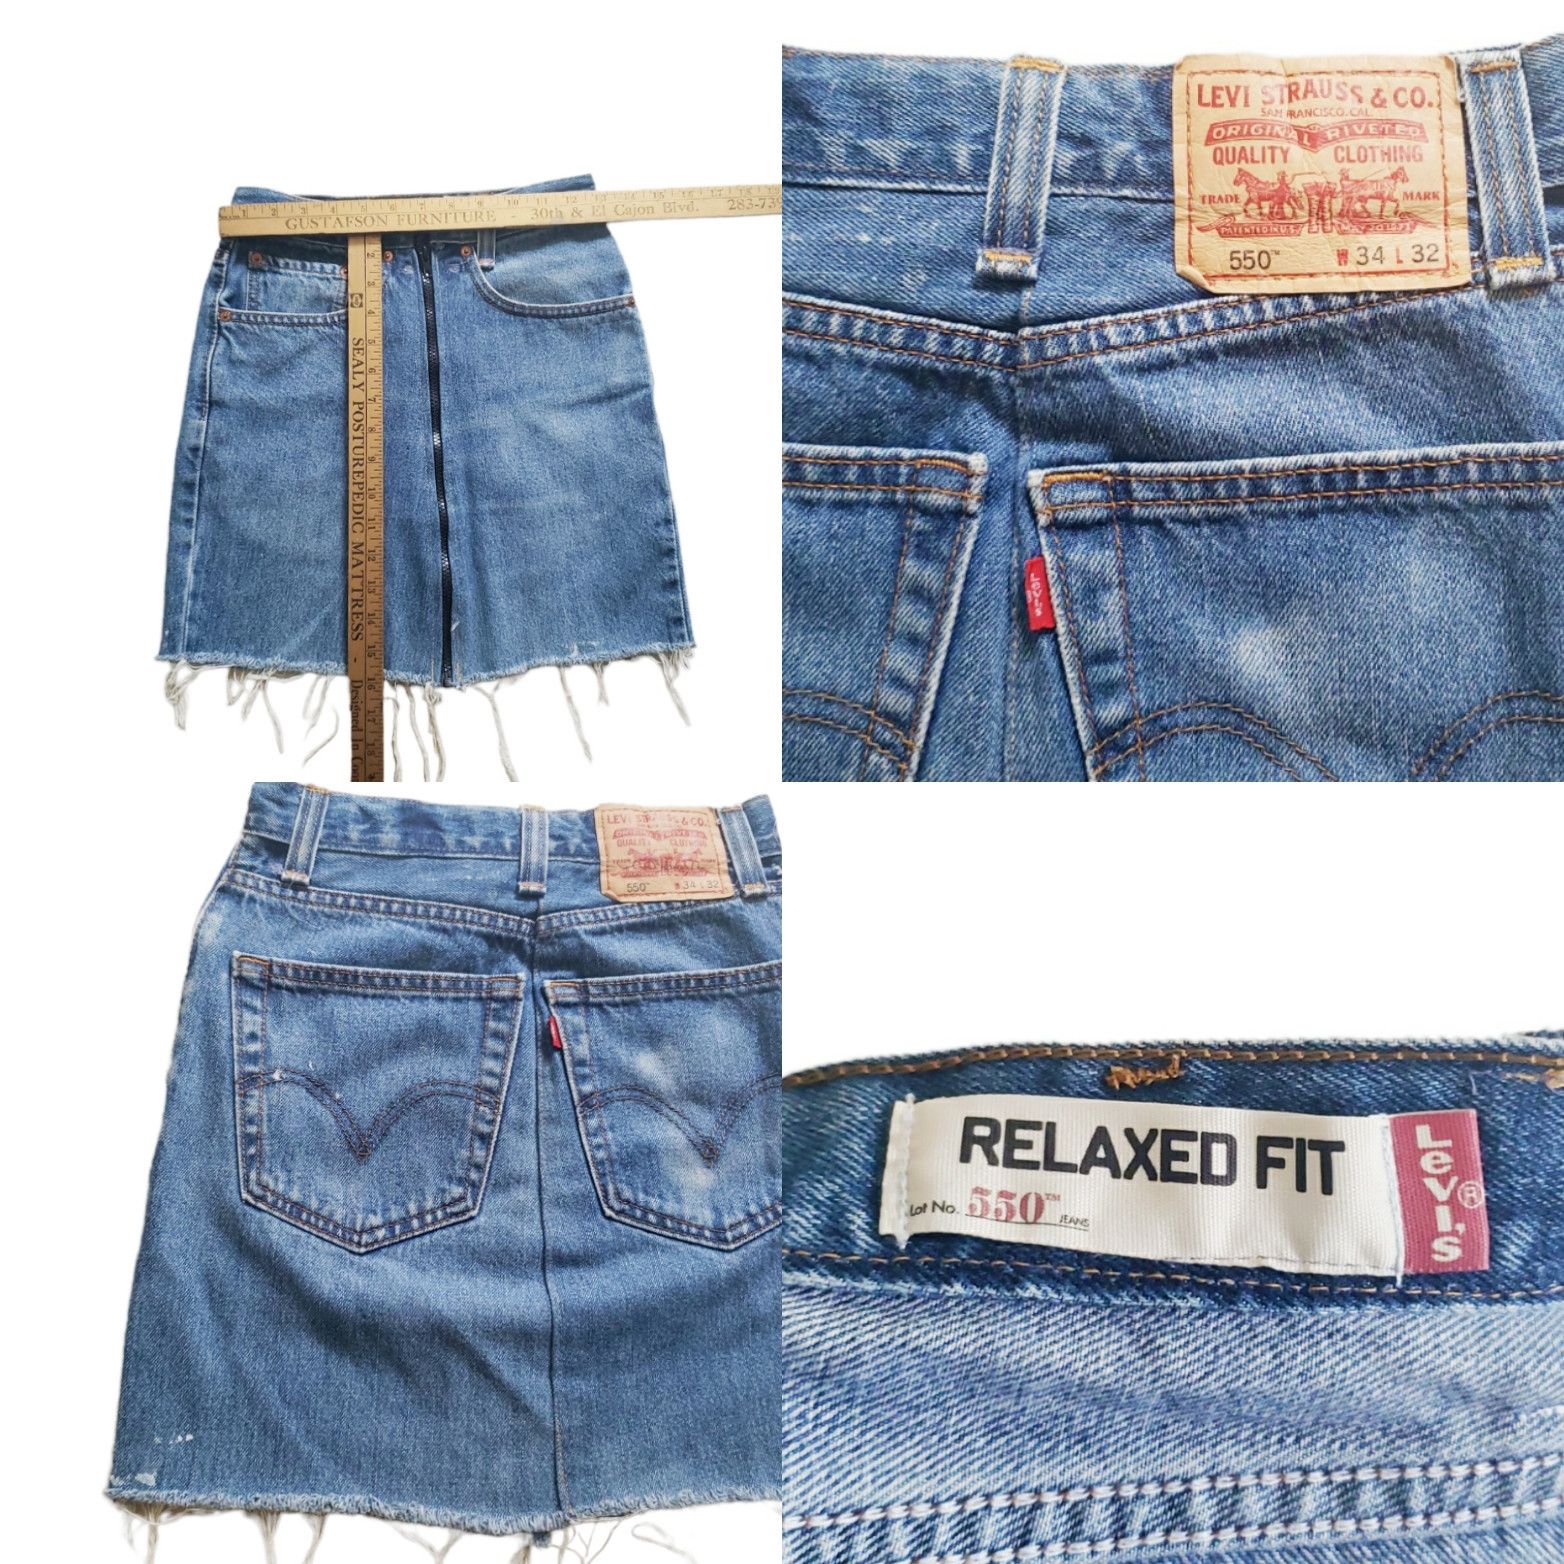 Vintage VTG Levi's 550 Original Repurposed Upcycled Distressed Custo Size 26" / US 2 / IT 38 - 2 Preview